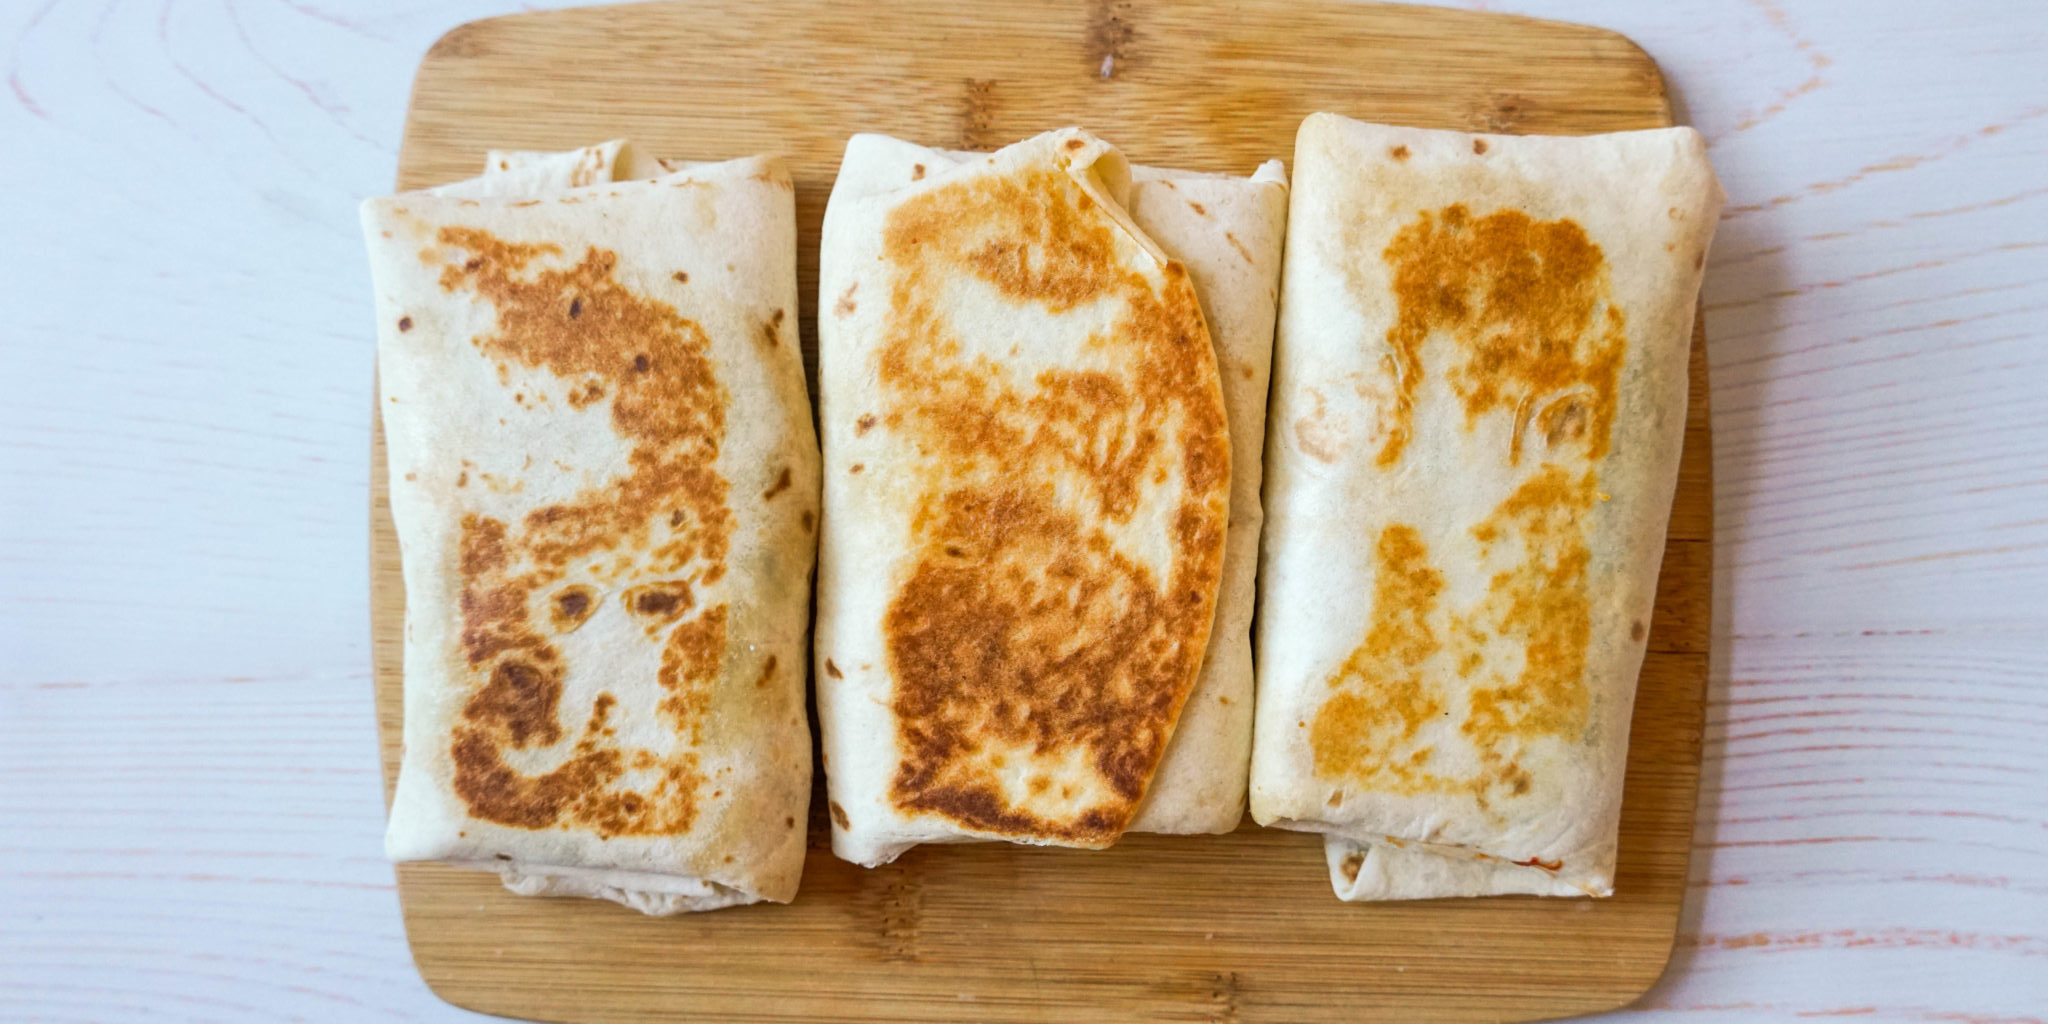 Three golden breakfast starbucks copycat recipe wraps are placed side by side on top of a brown wooden cutting board.